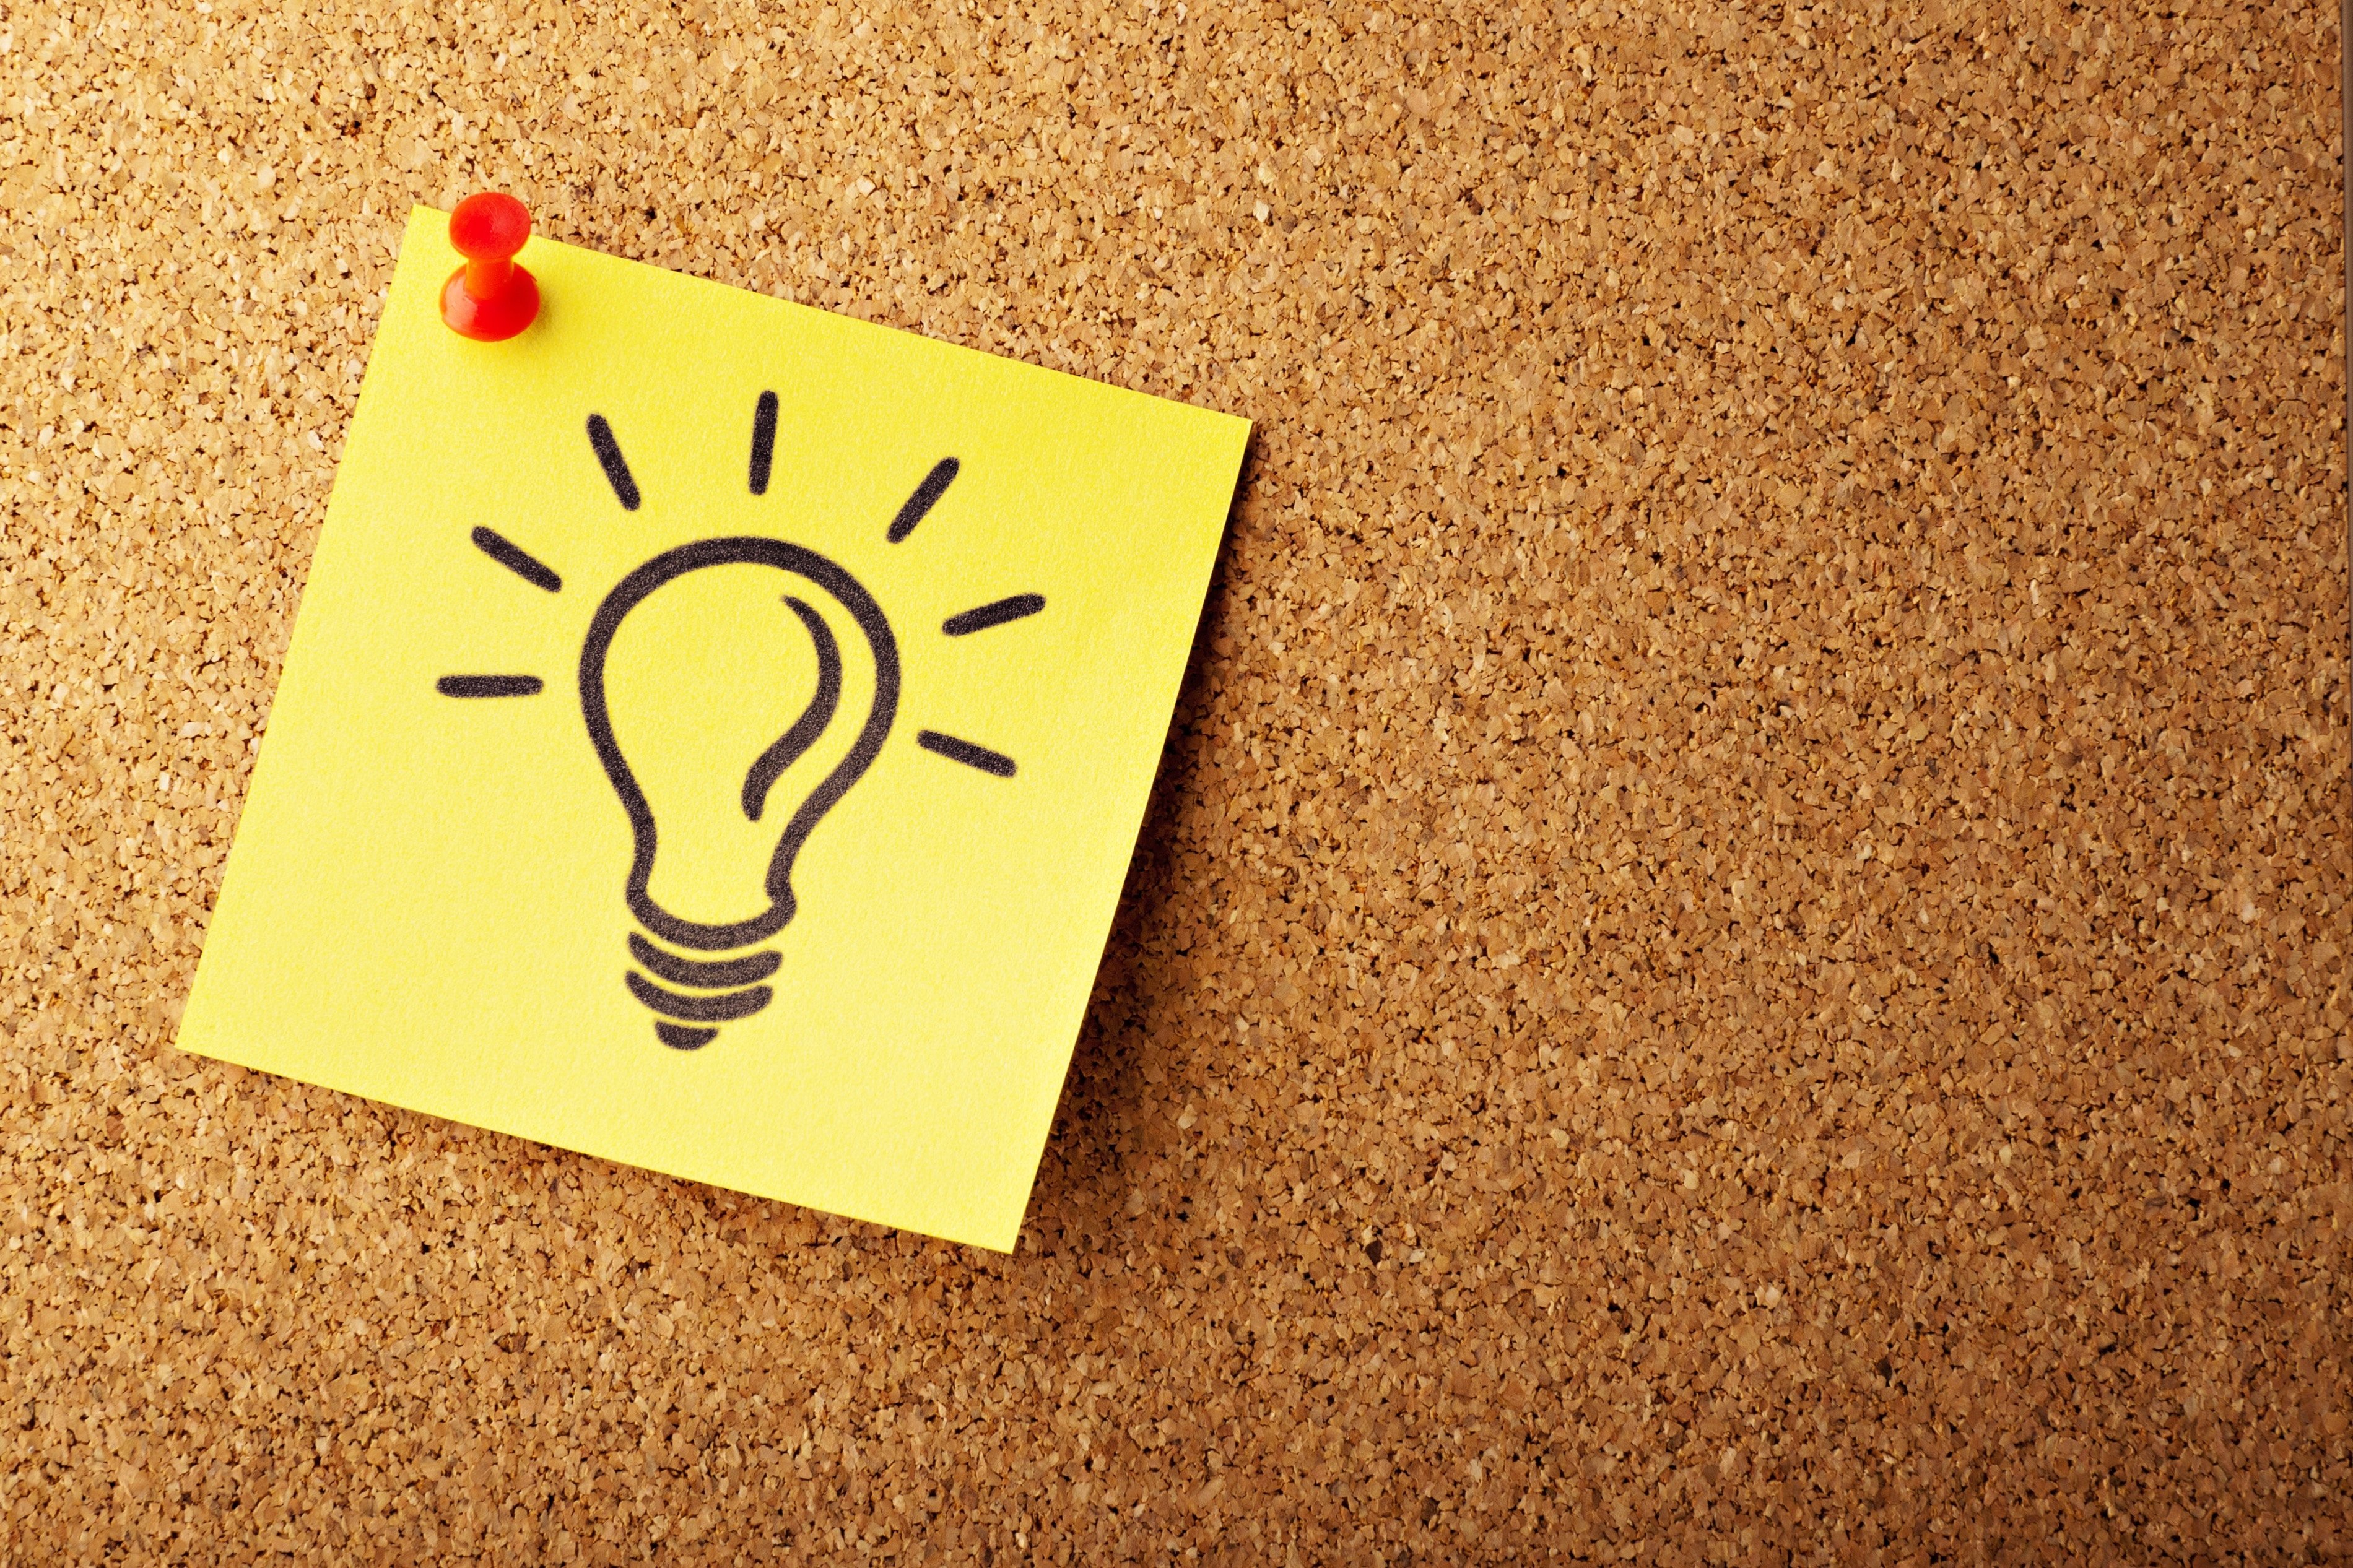 lightbulb on a post-it note depicting insightful questions pinned to a cork board